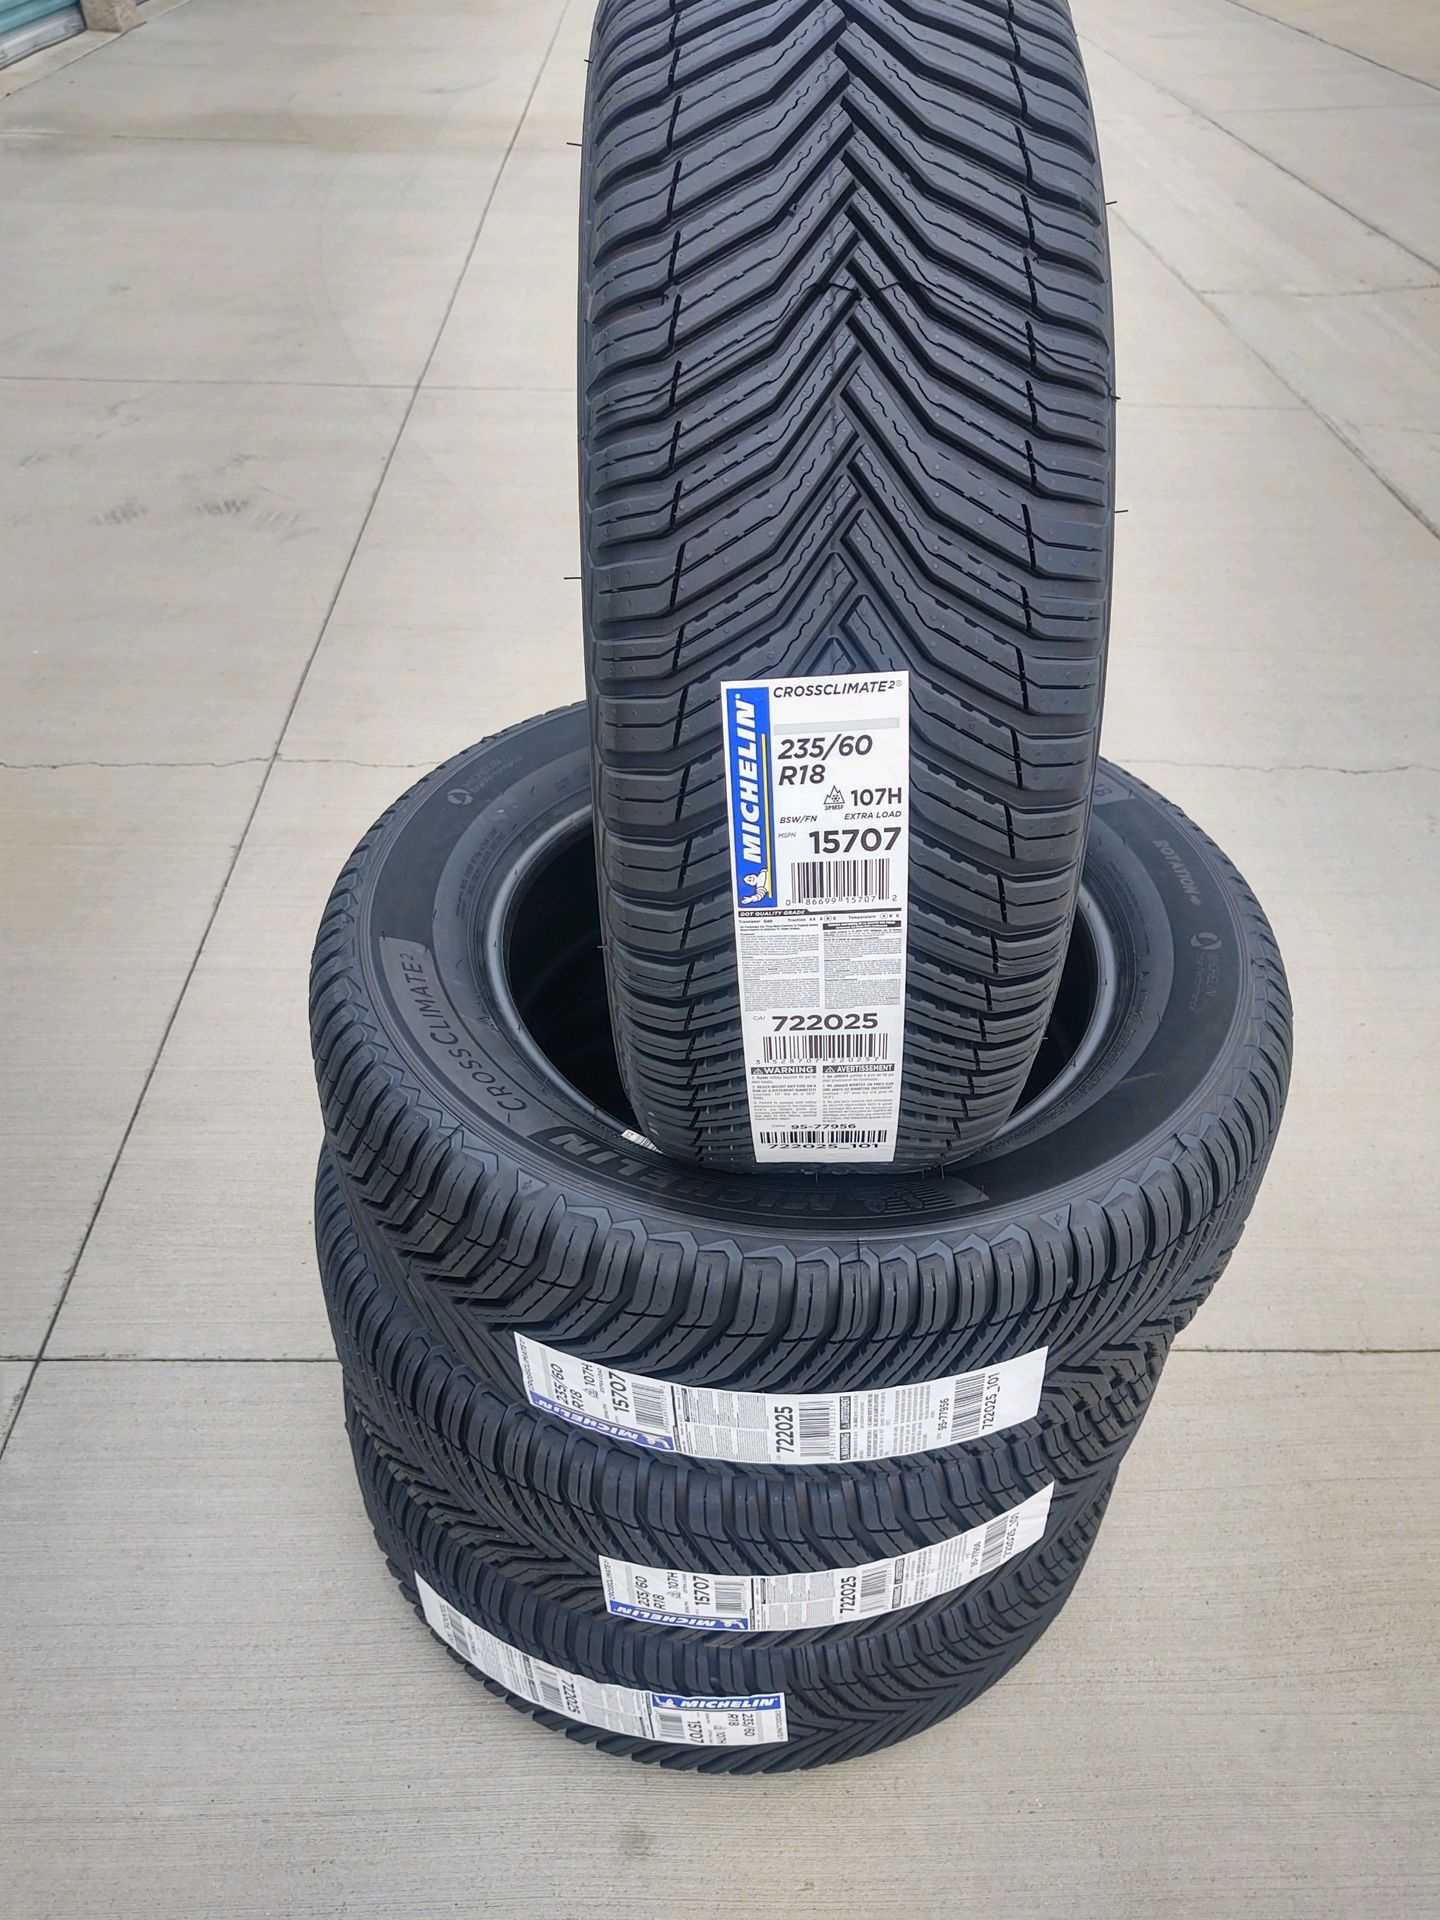 new 235/60/18 michelin tires  price is firm